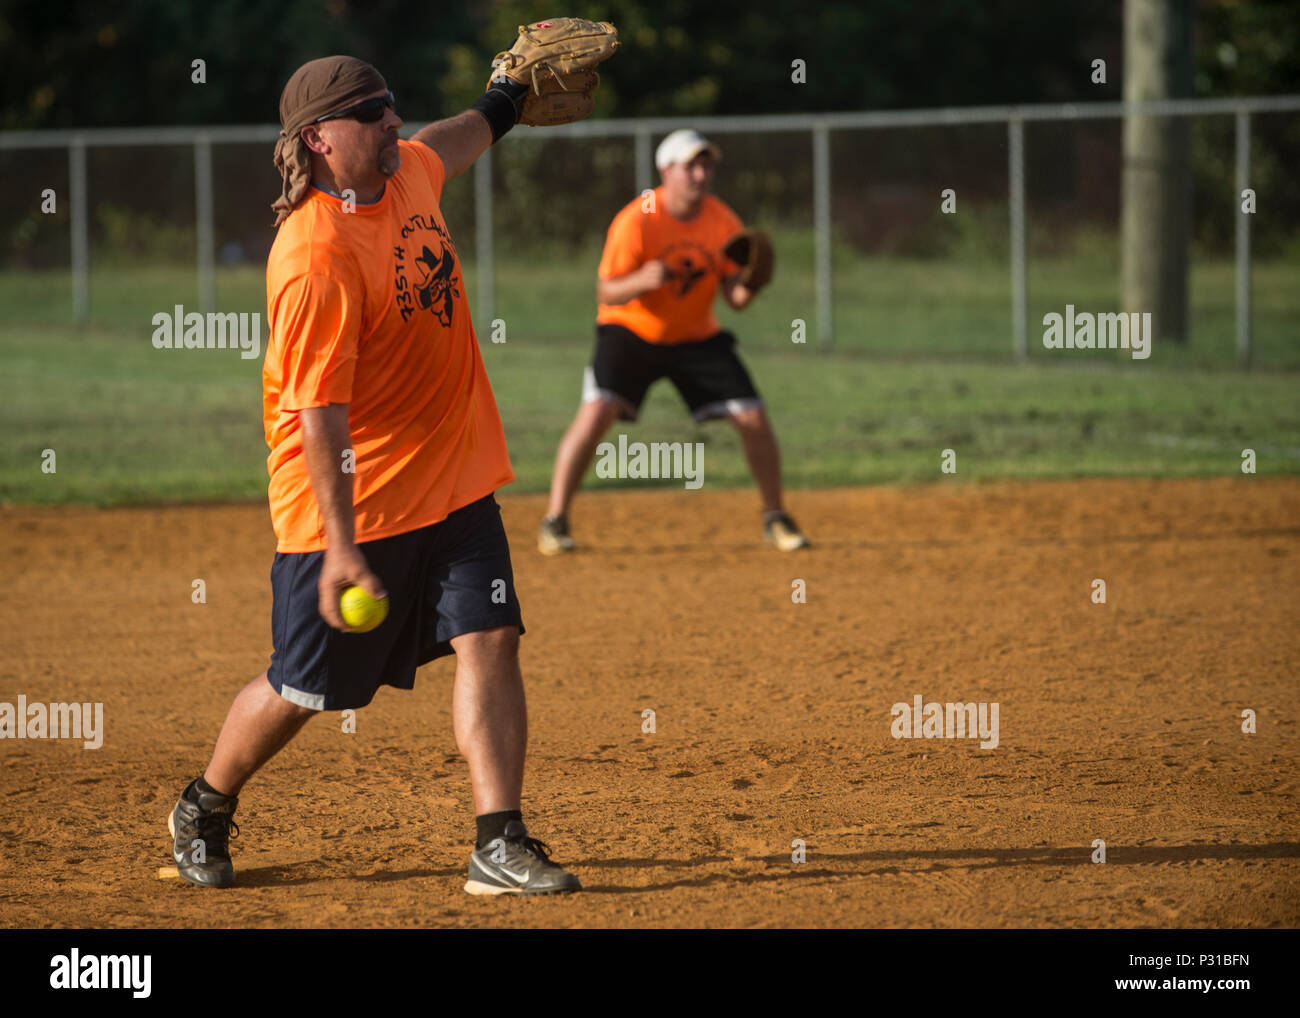 Mike Trader, 438th Special Operations Group F-16 mission capability deputy flight chief, throws a pitch during the 2016 Intramural Softball Championship game at Langley Air Force Base, Va., Aug. 10, 2016. The intramural sports program aims to promote physical fitness, morale and esprit de corps through athletic competition. Stock Photo